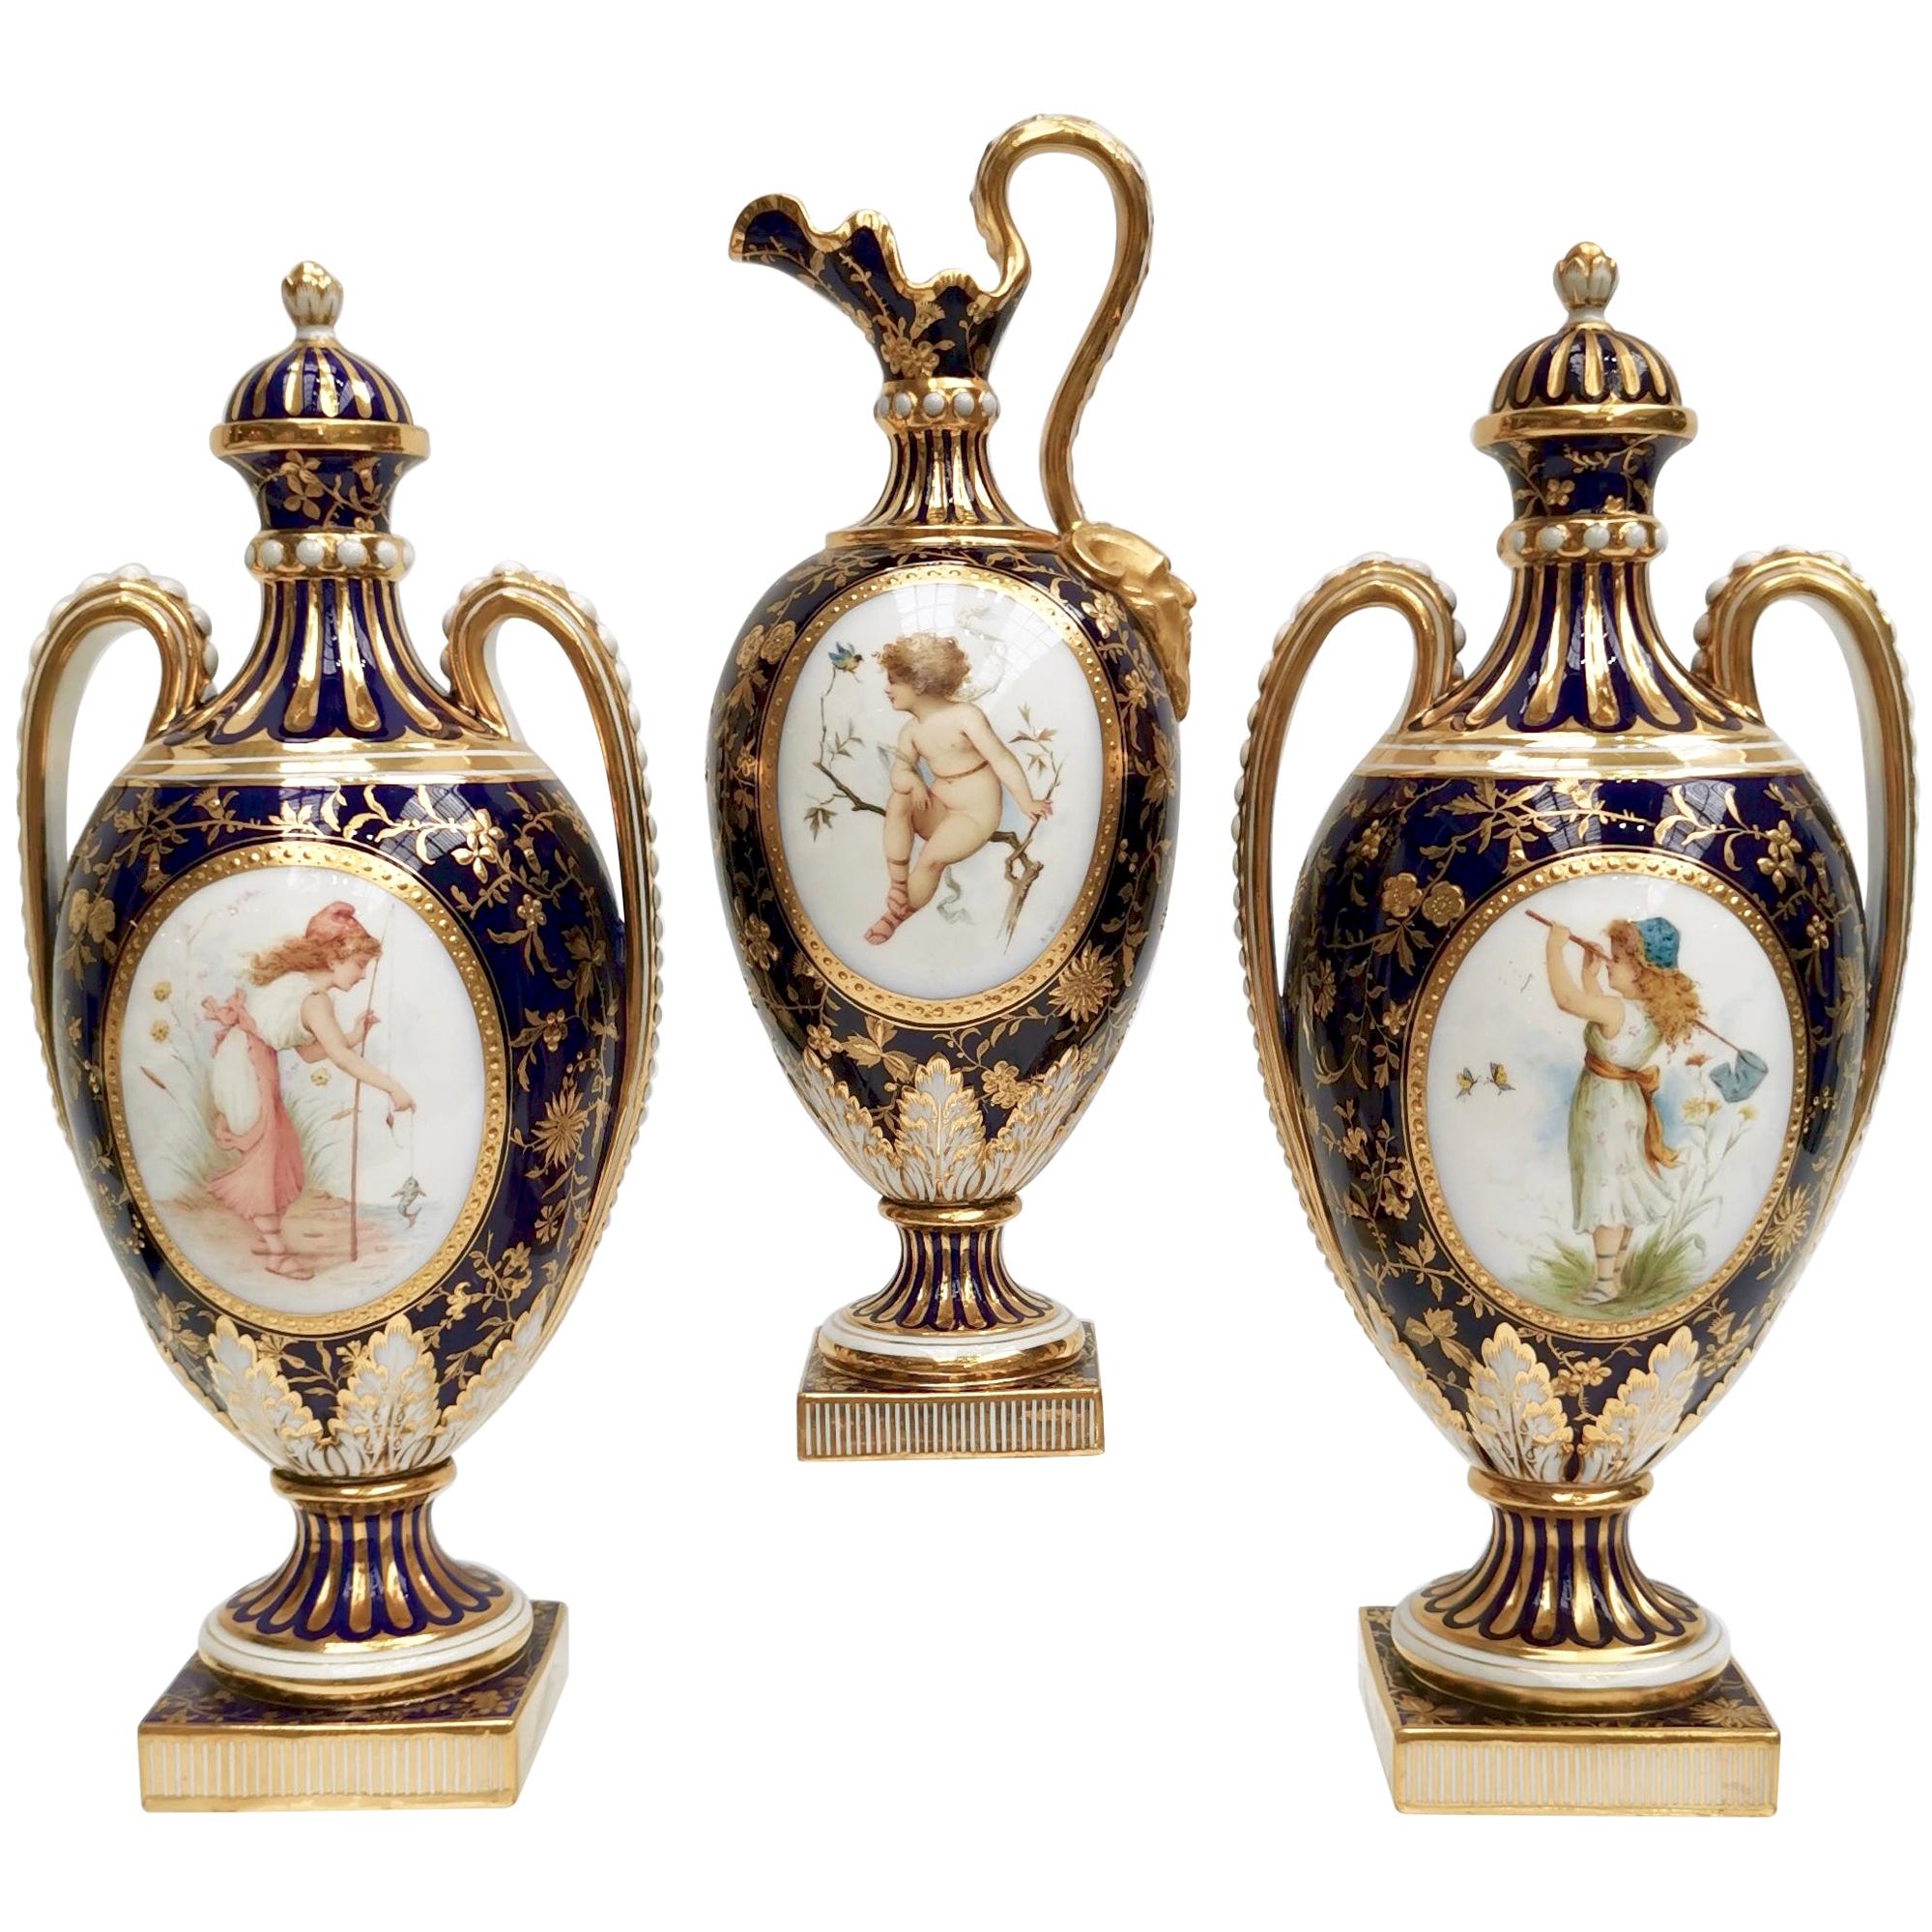 Minton Garniture Decorated and Signed by Antonin Boullemier, 1891